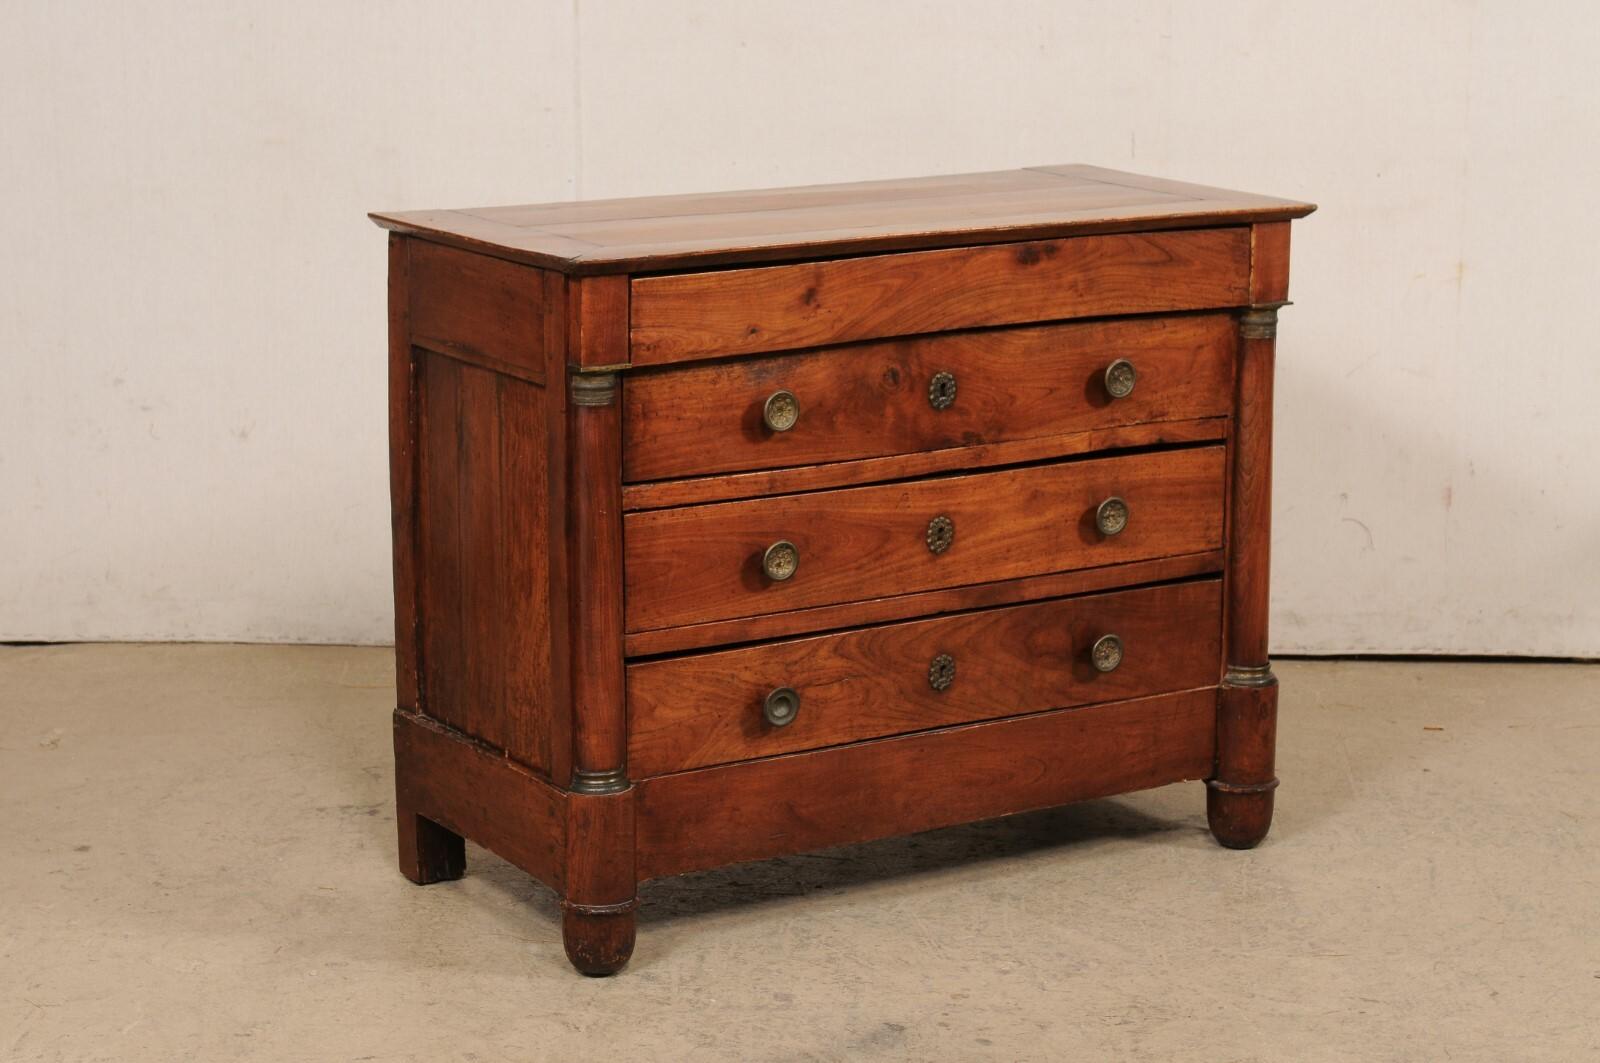 A French Neoclassical four drawer commode, with its original metal hardware and accents, from the 19th century. This antique chest from France features a rectangular-shaped top, which slightly overhangs the case which houses four drawers (upper